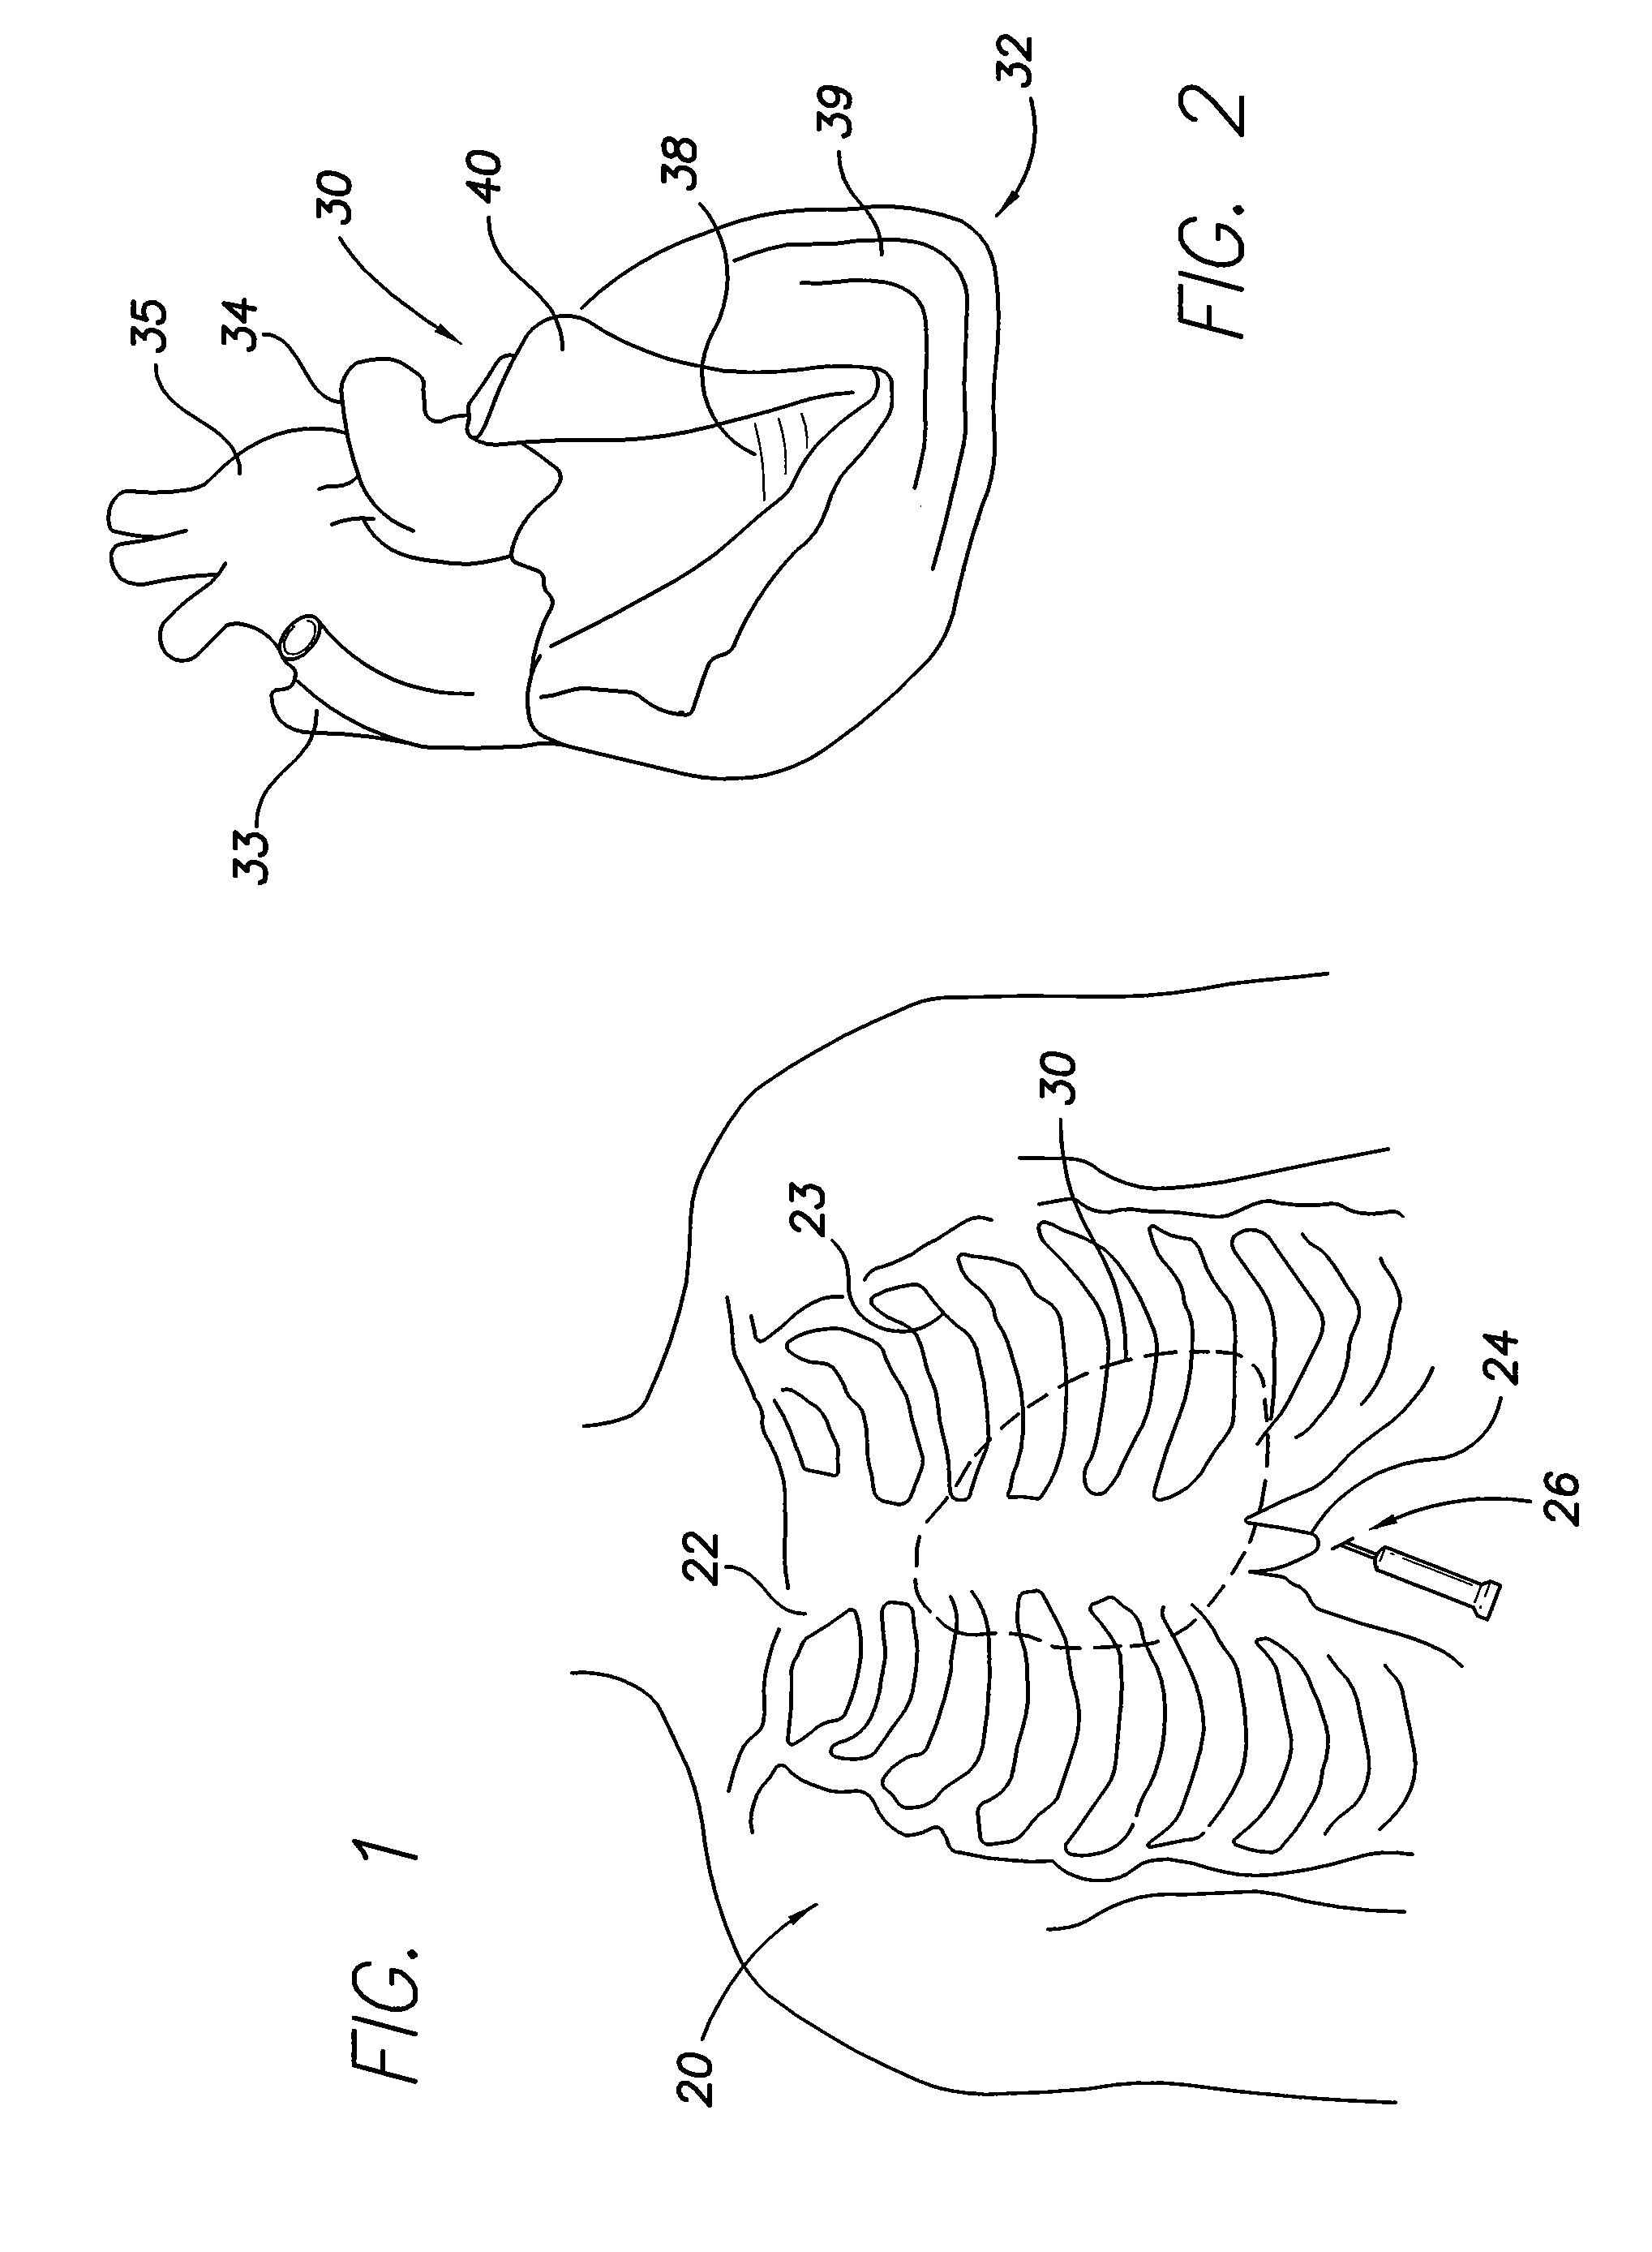 Intra-pericardial medical device